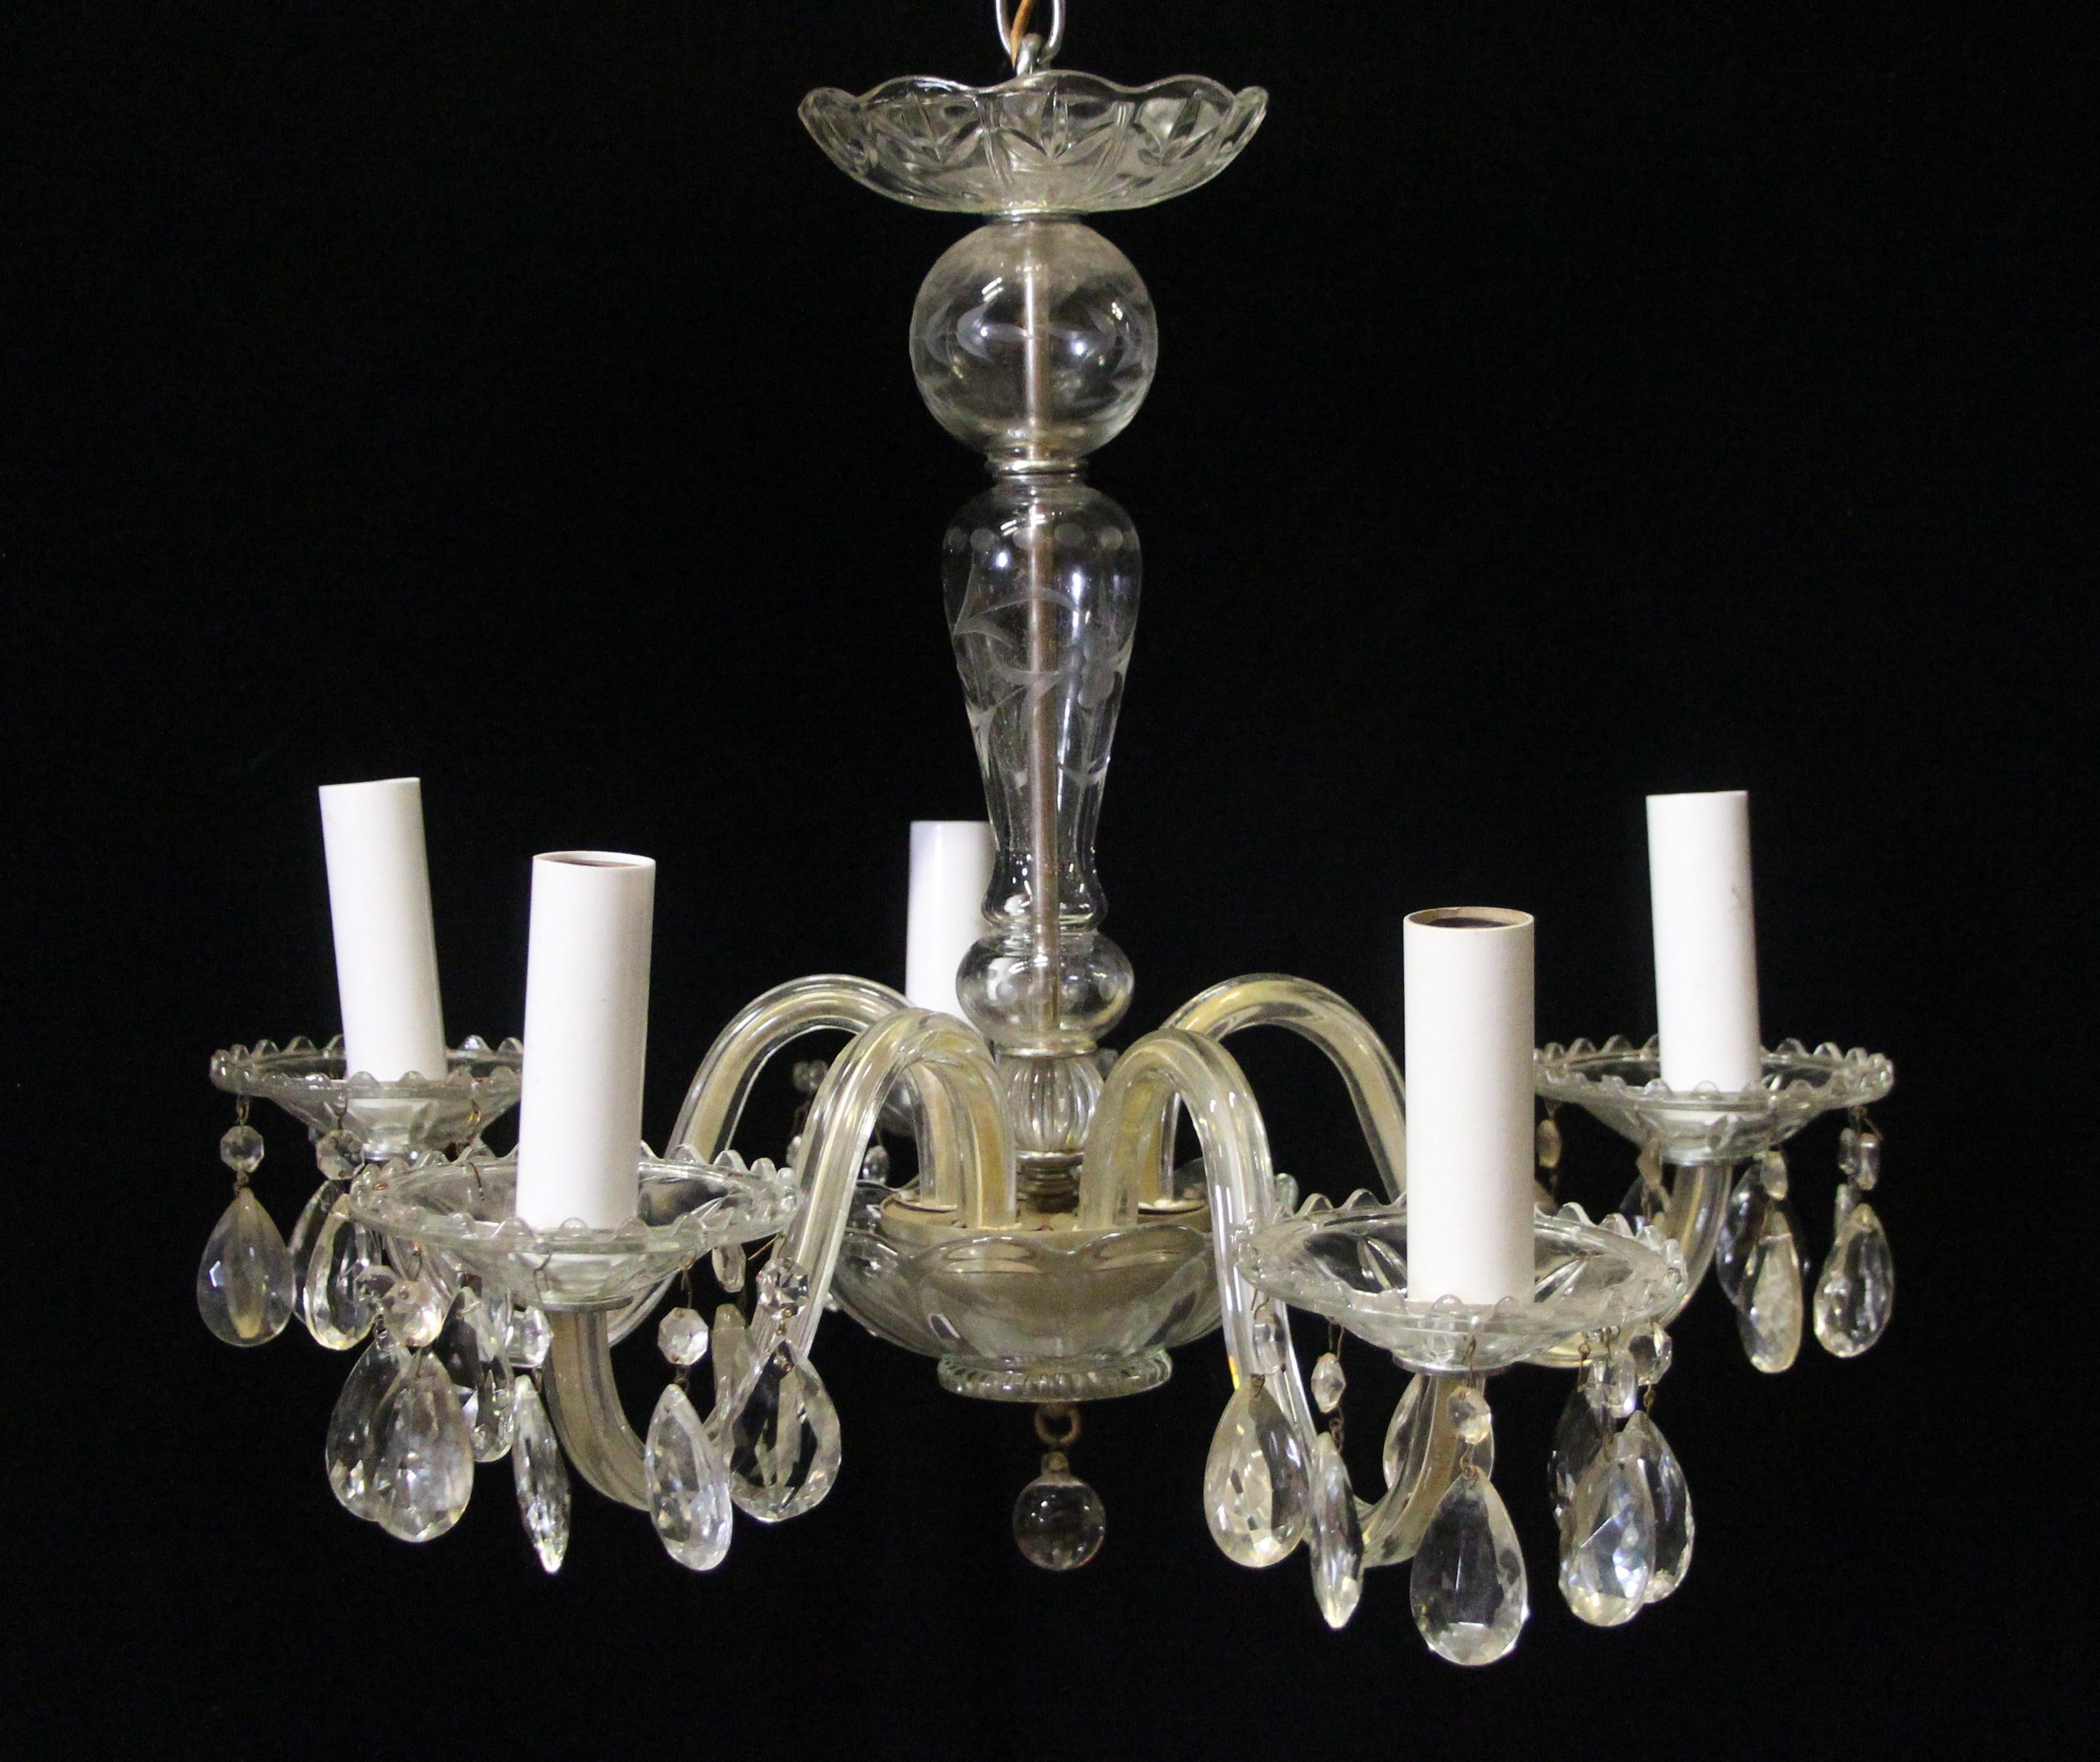 Five light crystal chandelier with etched glass and pressed bobeches. This 1940's light has clear glass and tear drop crystals. Price includes restoration. This can be seen at our 400 Gilligan St location in Scranton, PA.